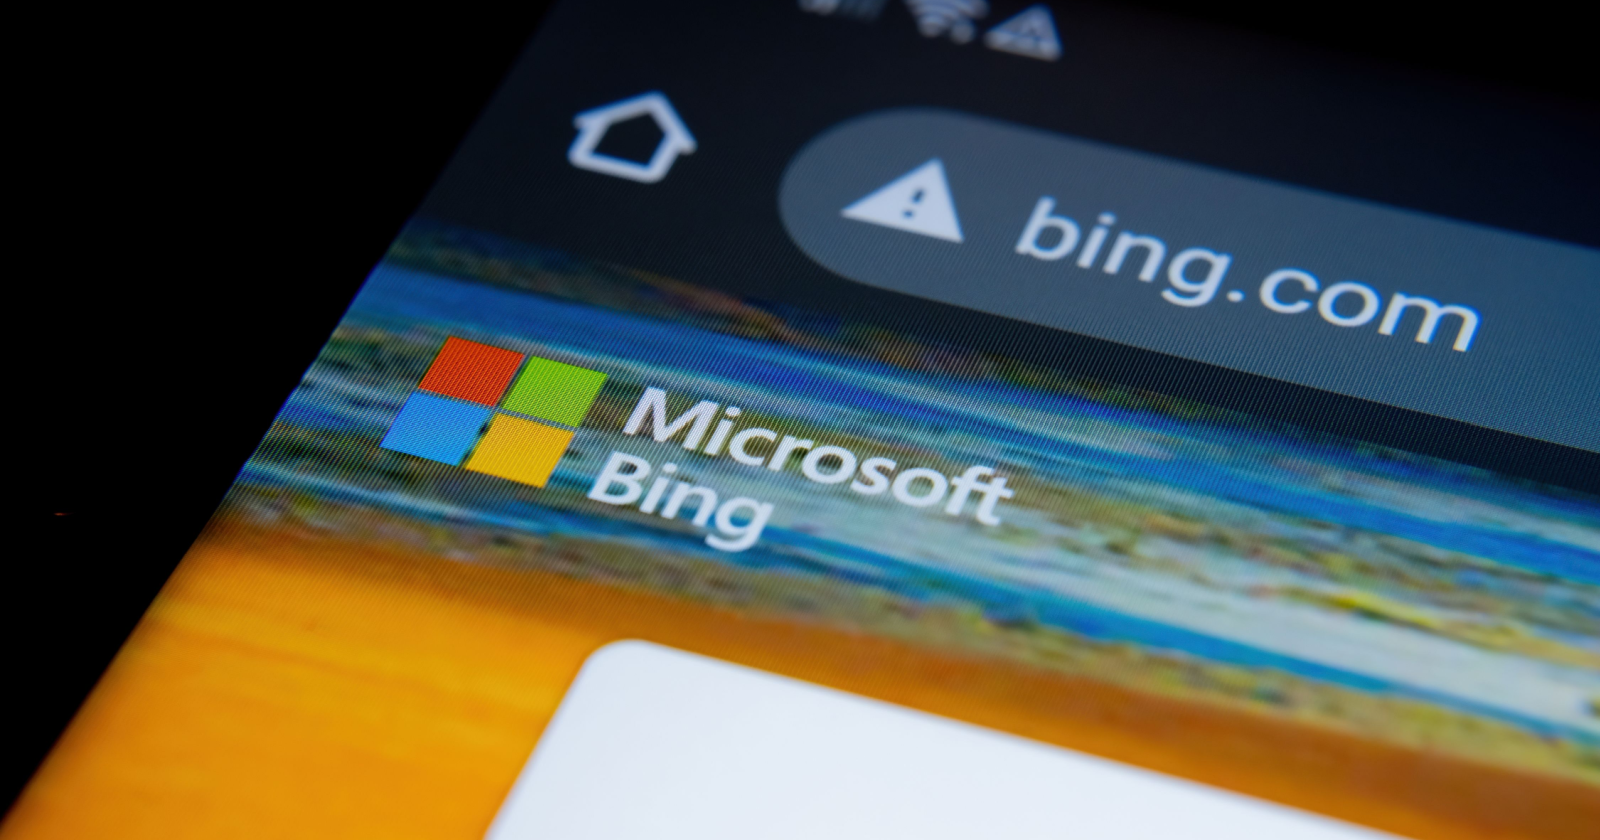 Bing revamps crawling system to increase efficiency